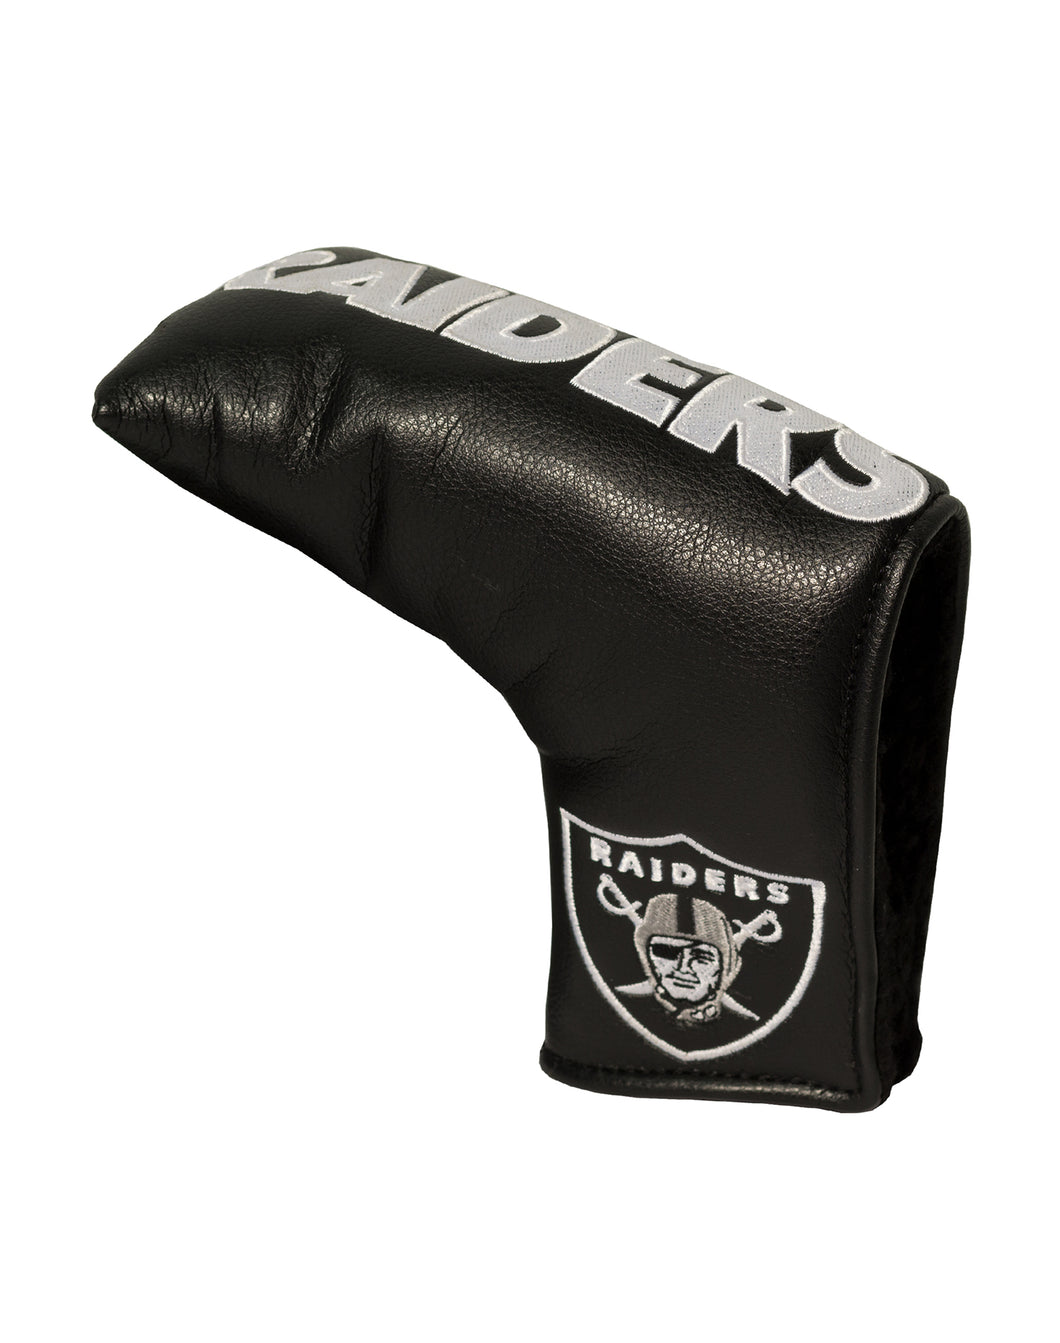 NFL Official Vintage Golf Blade Style Putter Headcover. L A Raiders